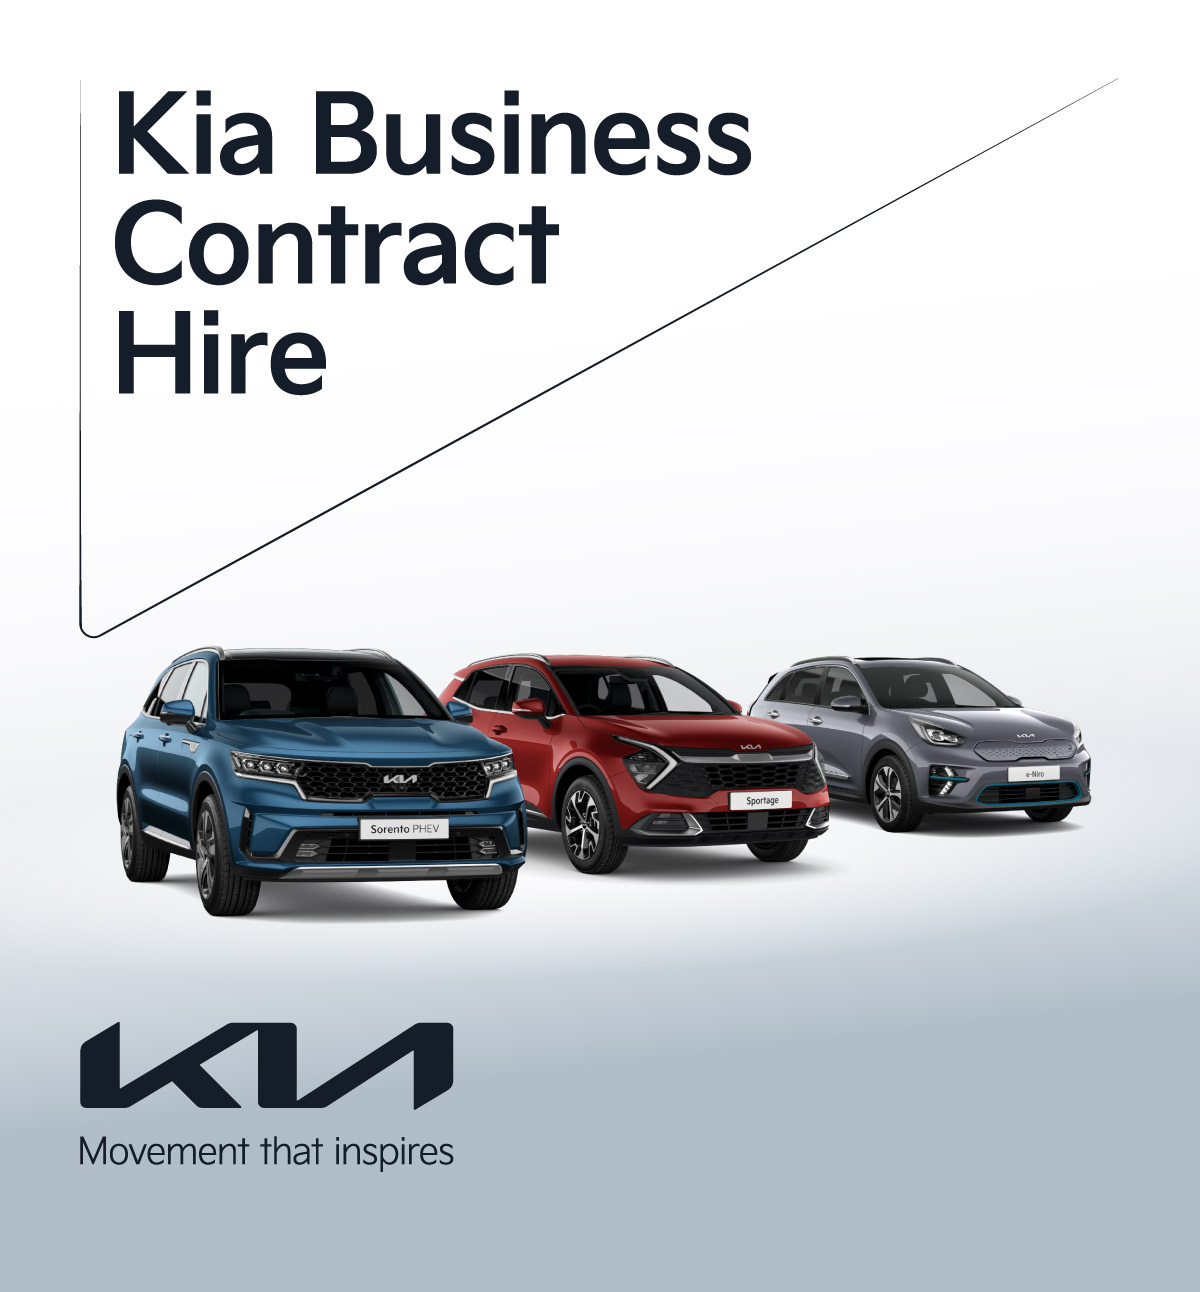 Kia Business Contract Hire Top Banner 250222